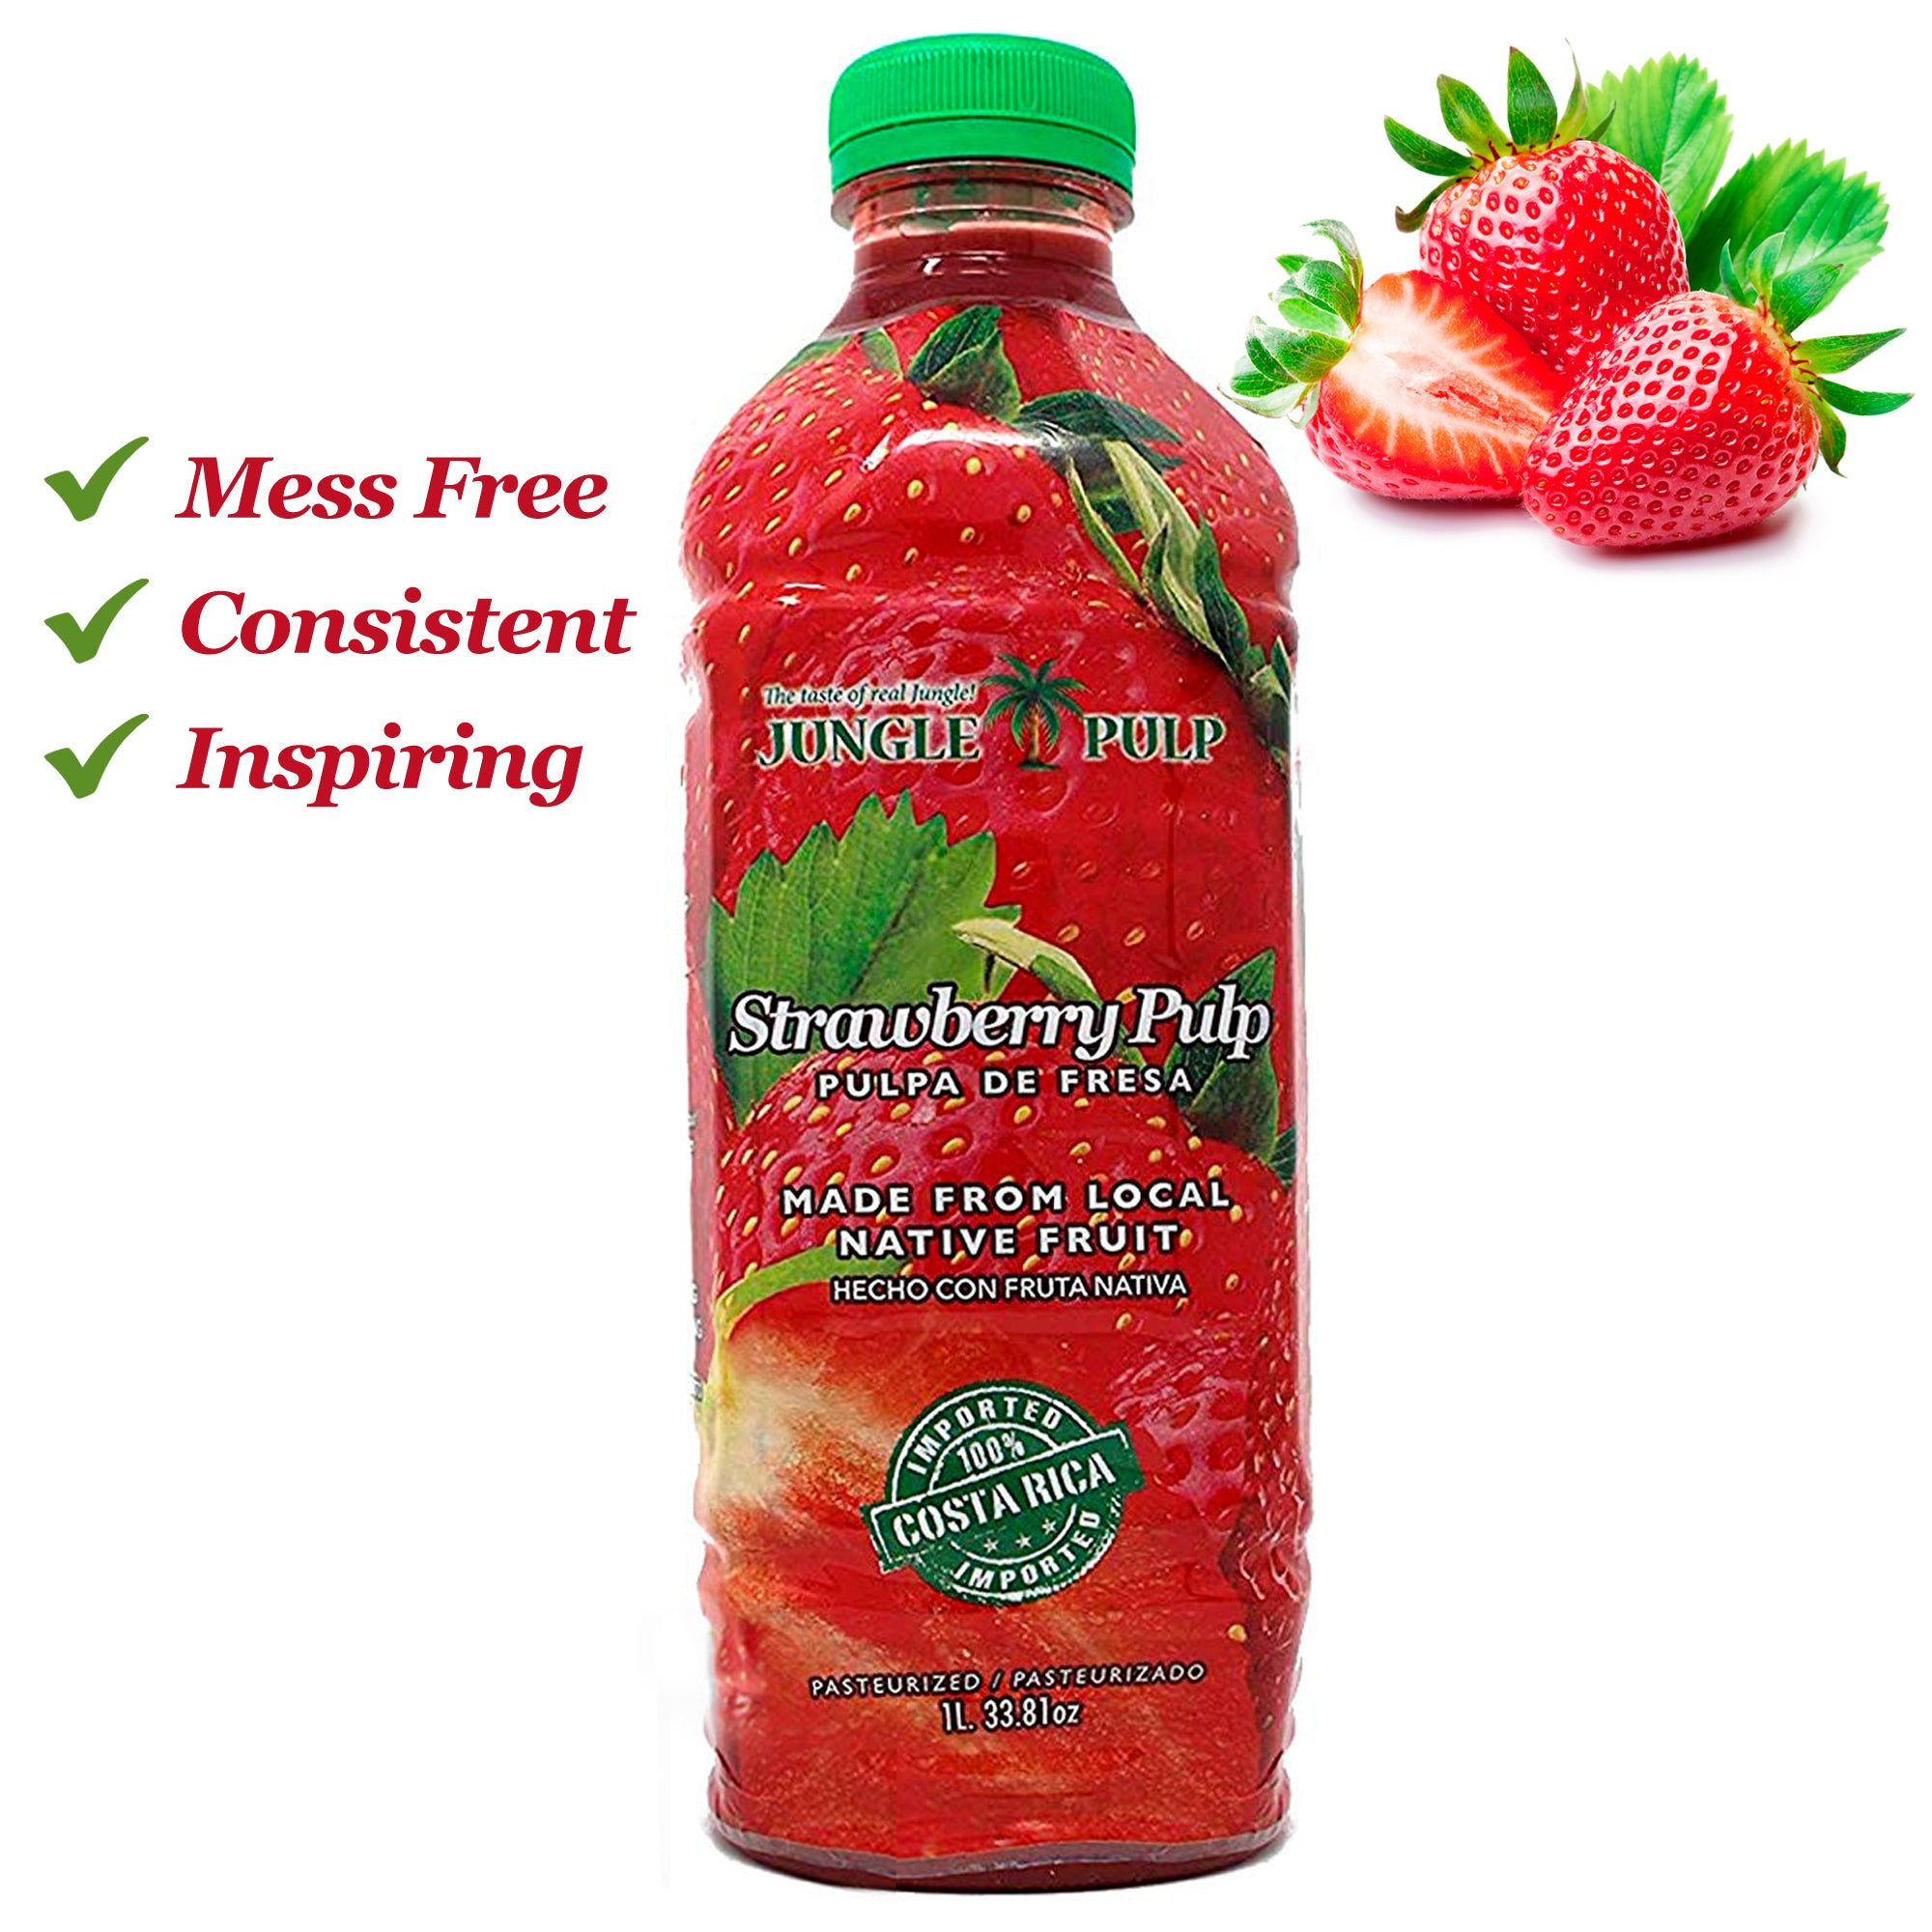 A perfect strawberry puree start your mornings with - Jungle Pulp